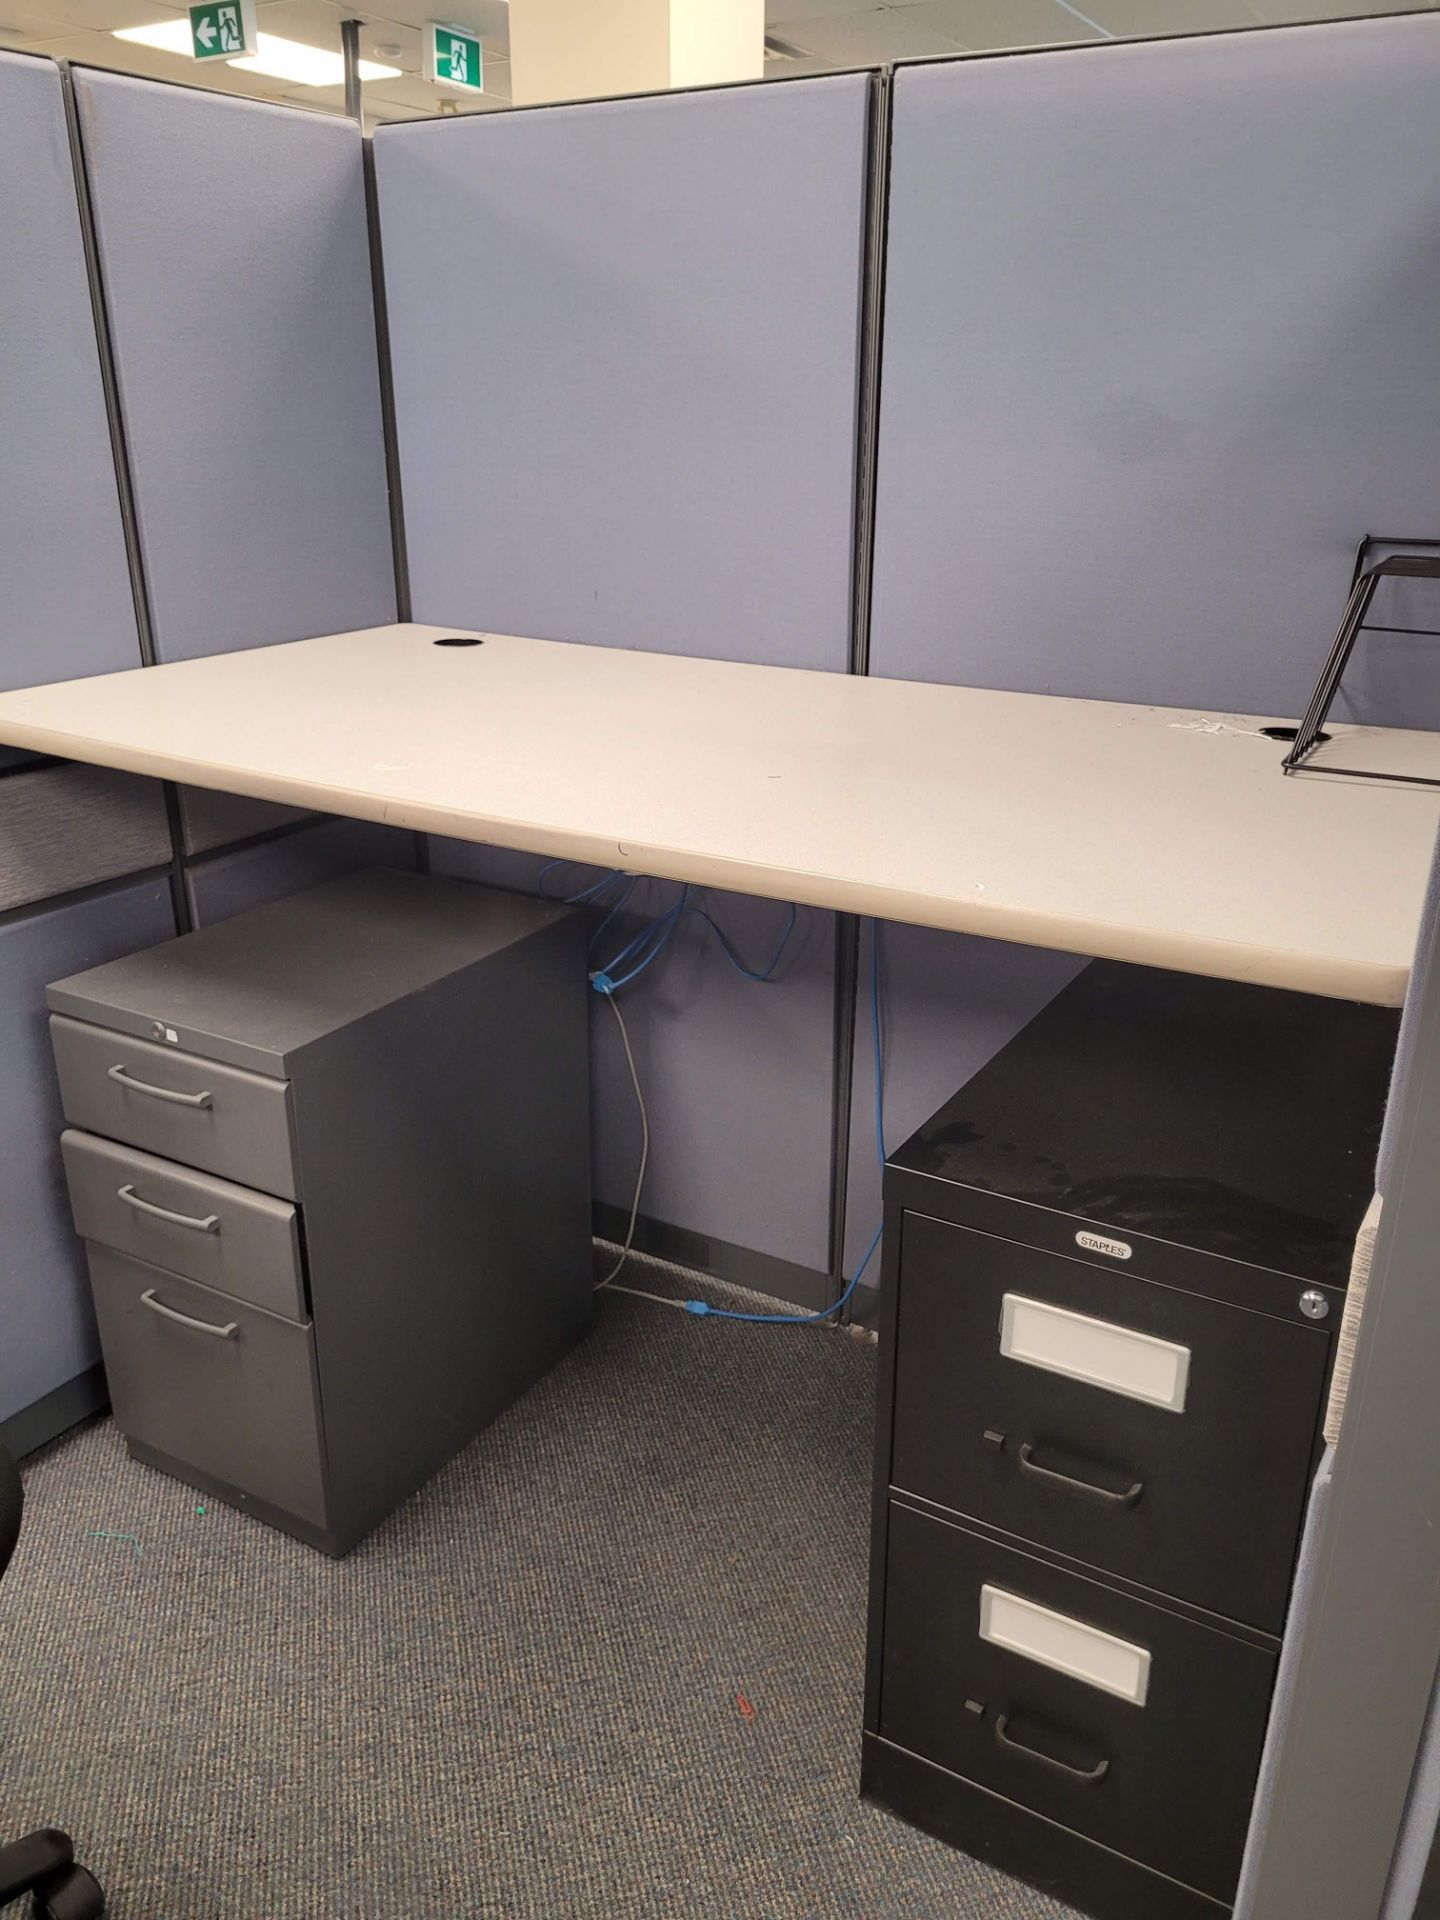 LOT - 4 STATION TEKNION CUBICLE - (NO CHAIRS, NO CONTENTS) - Image 3 of 3